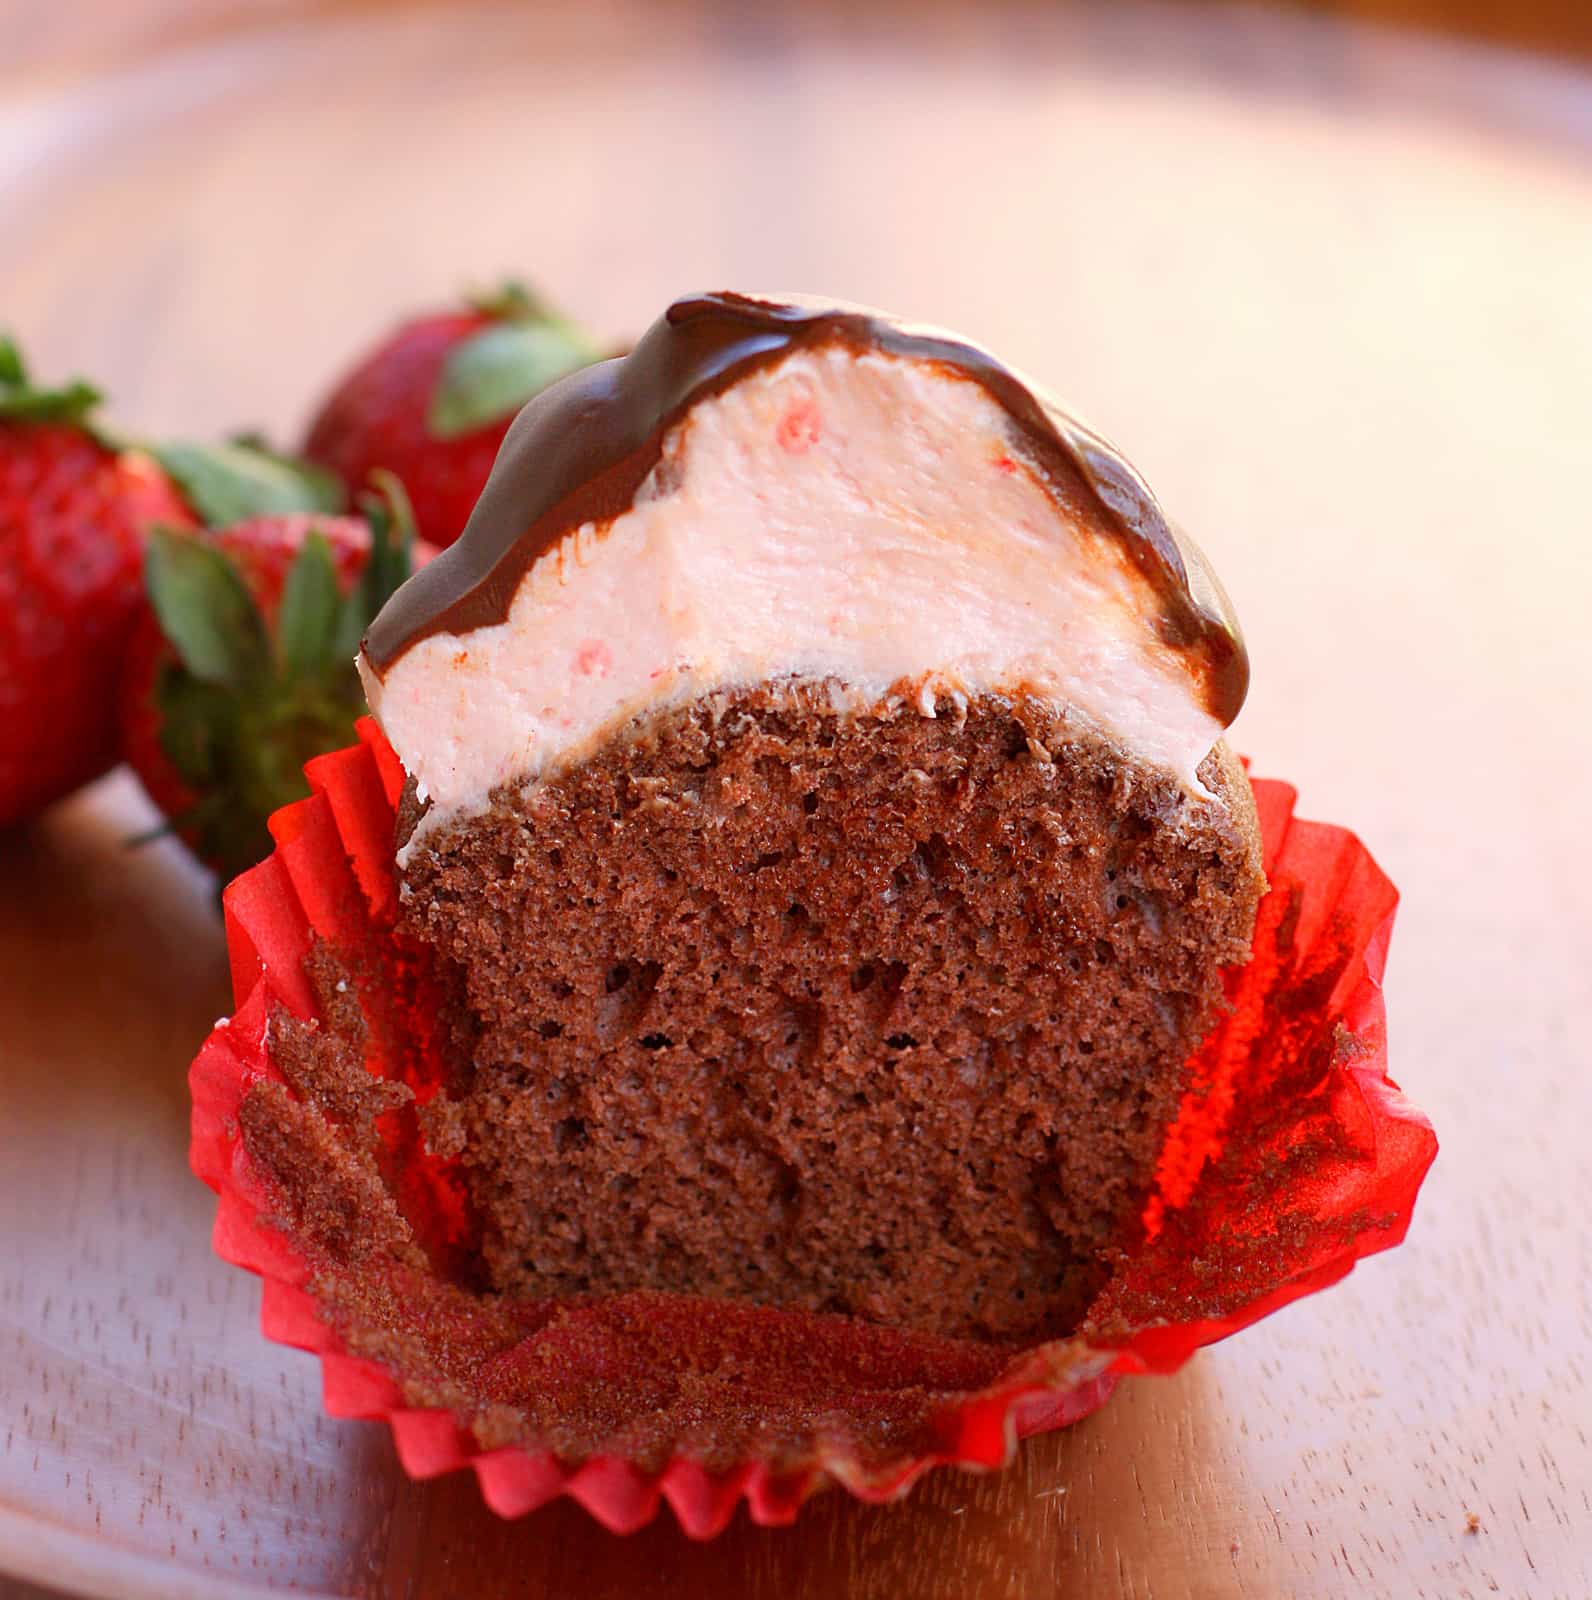 Strawberry Puffcakes - chocolate cupcakes topped with strawberry cream and dipped in chocolate. the-girl-who-ate-everything.com